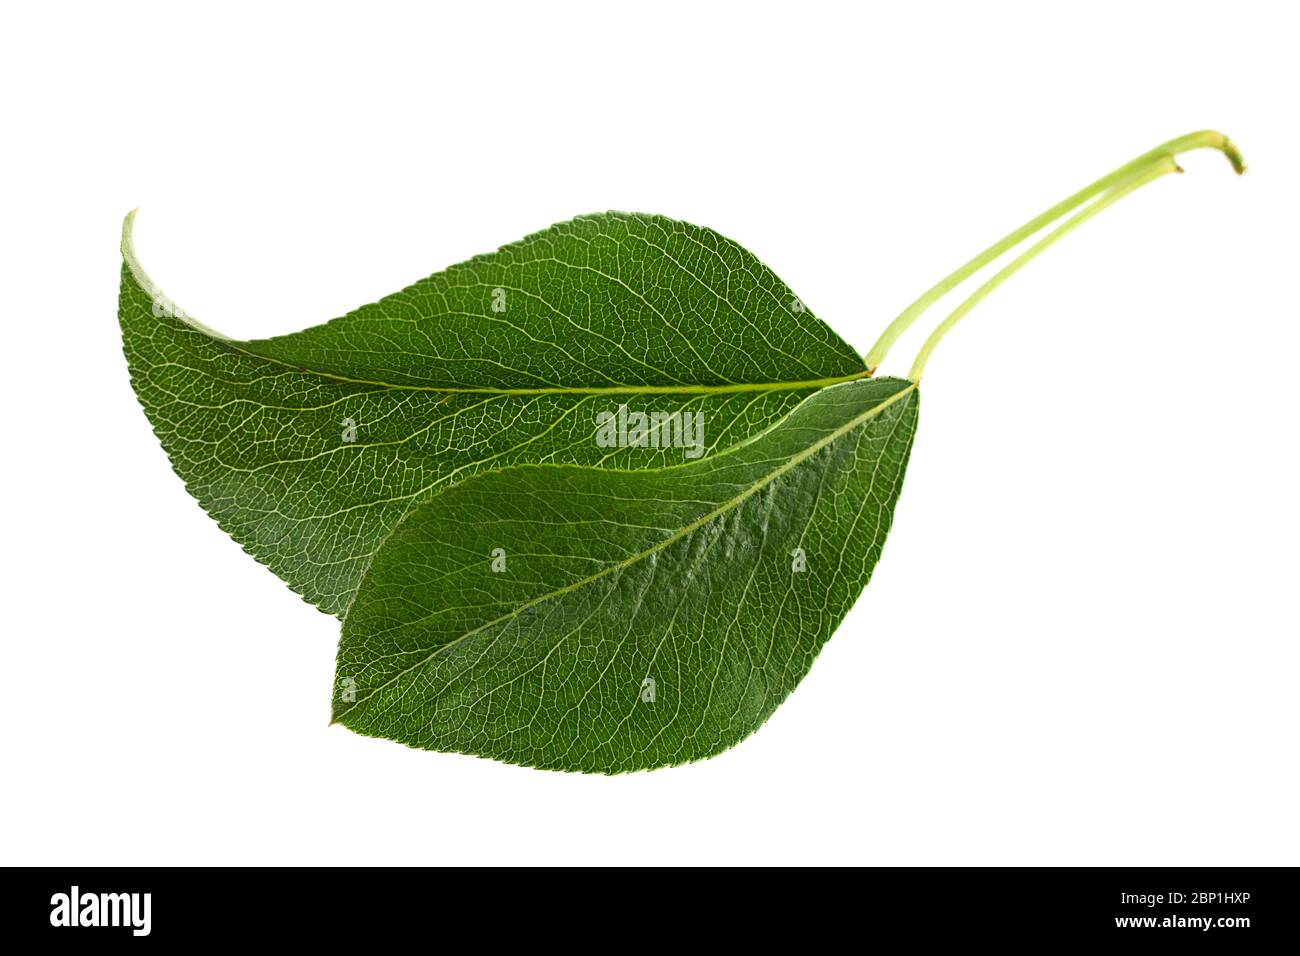 Pear leaf closeup isolated on white background Stock Photo